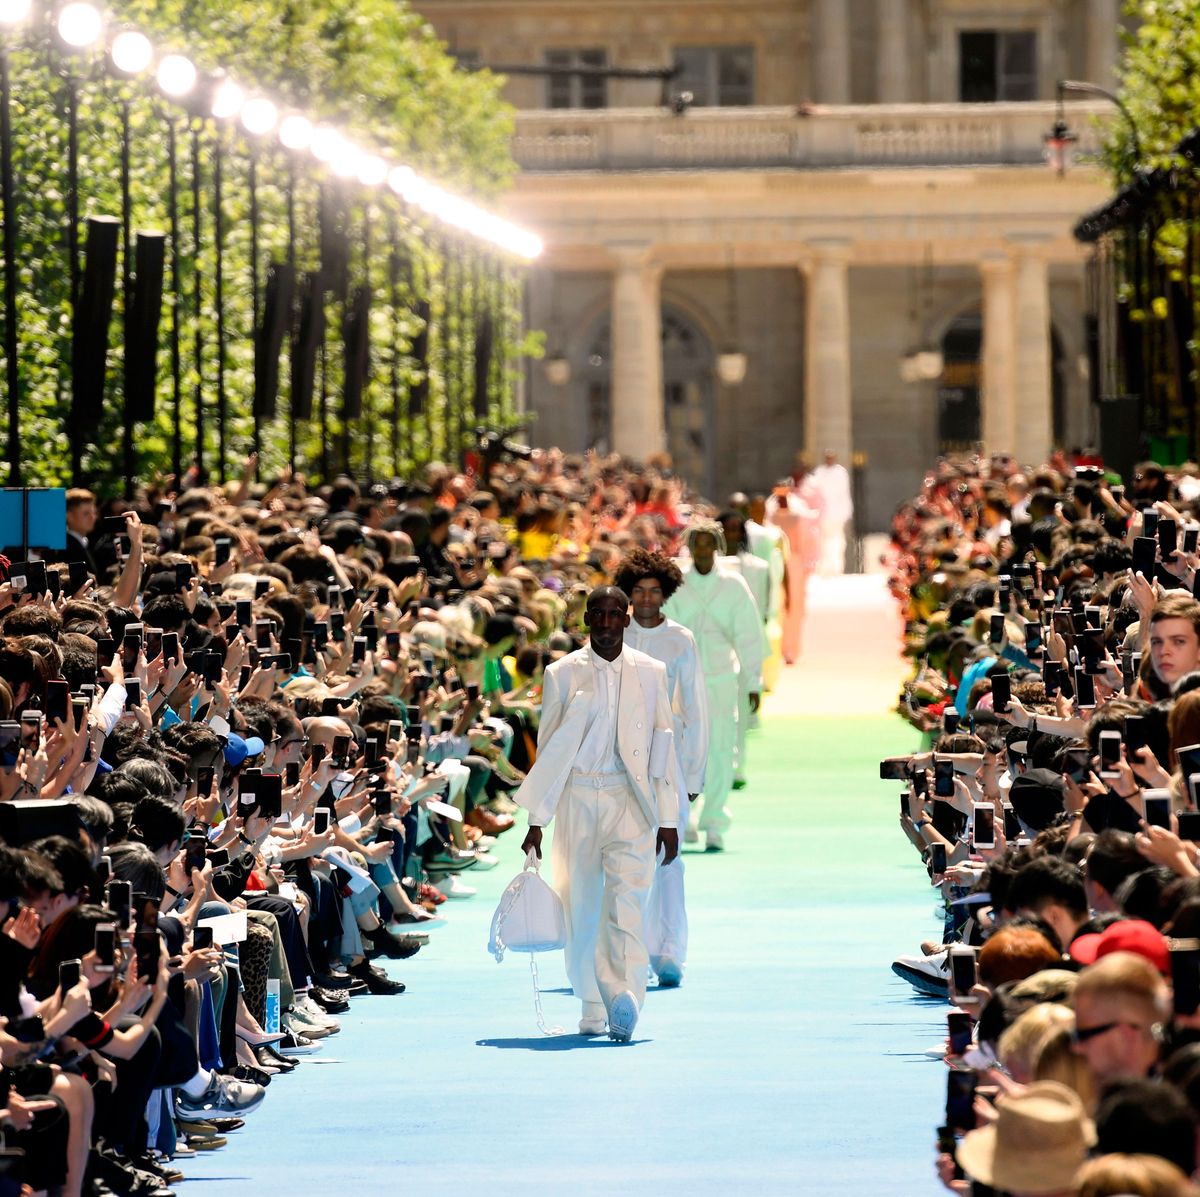 See Virgil Abloh's First Louis Vuitton Collection